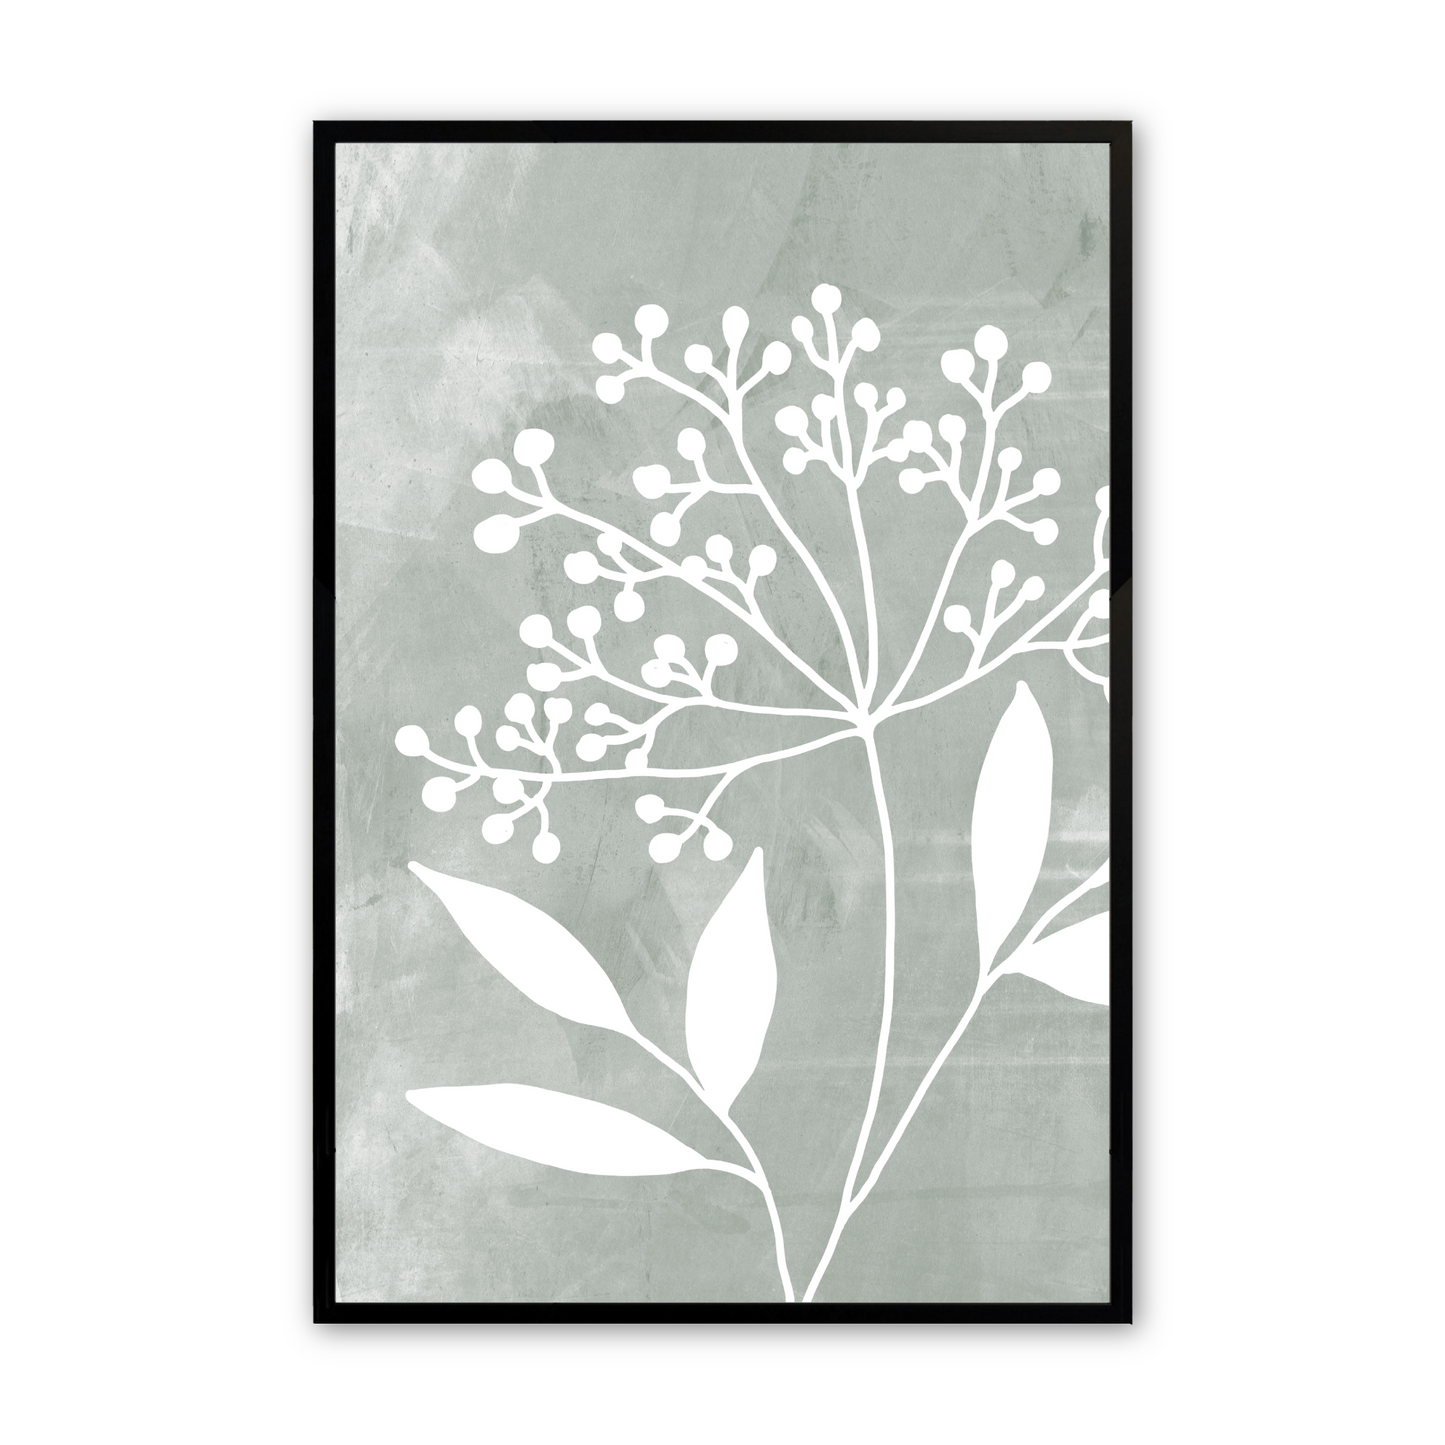 [color:Satin Black], Picture of the third of 3 leaf illustrations in a black frame